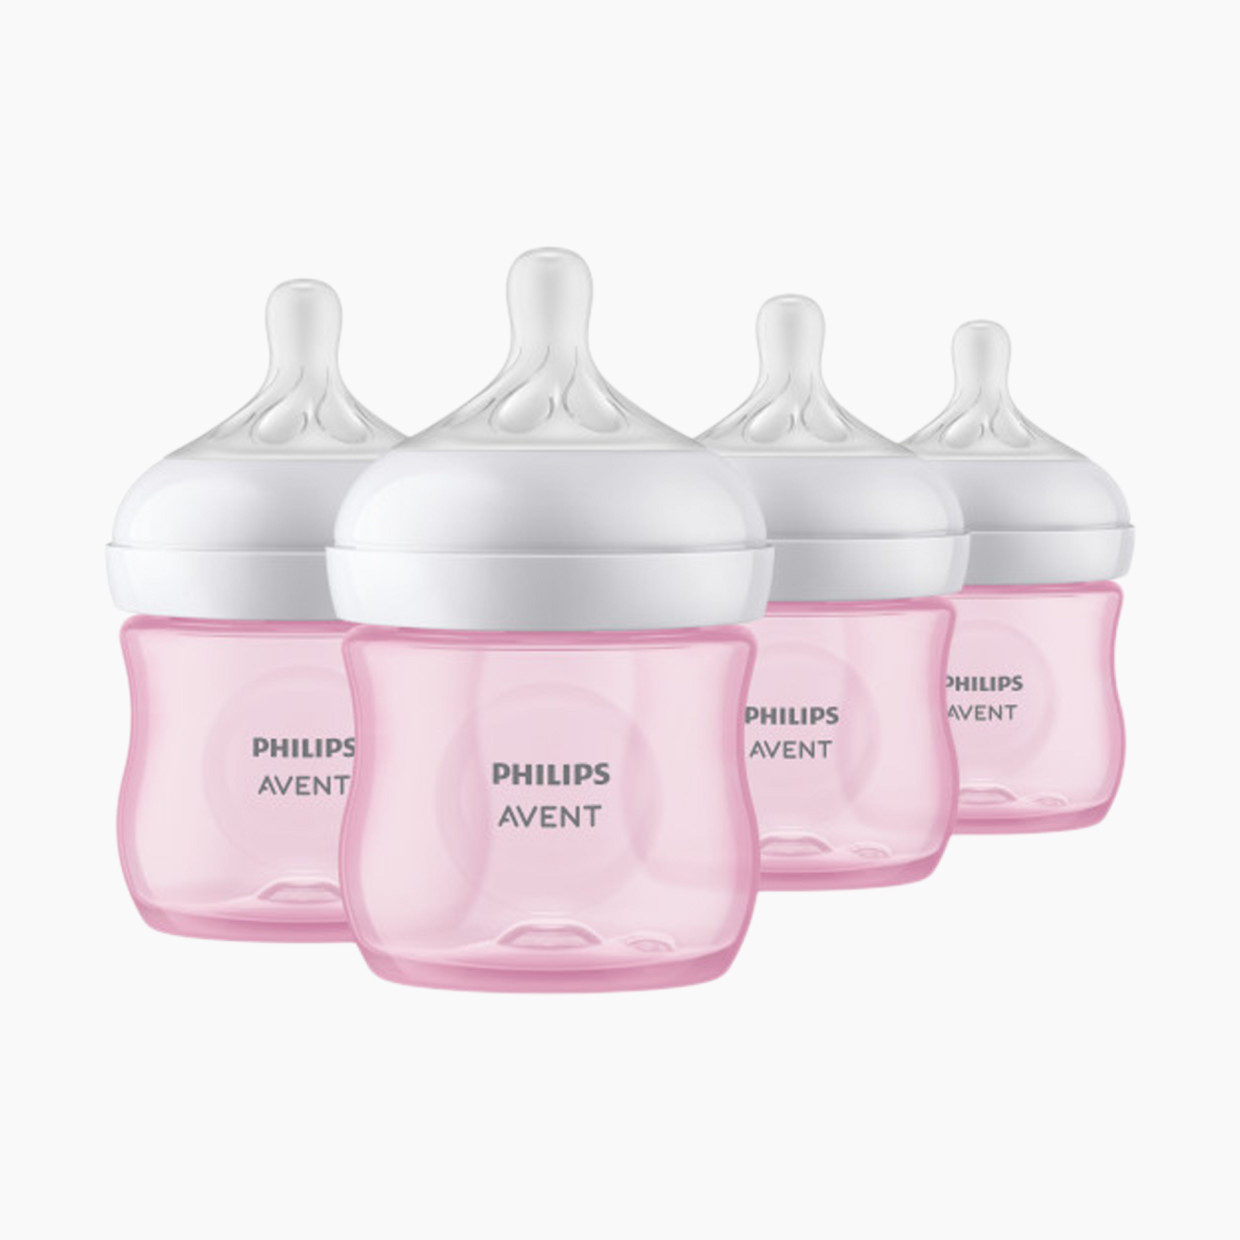 Philips Avent Avent Natural Baby Bottle With Natural Response Nipple - Pink, 4 Oz, 4.